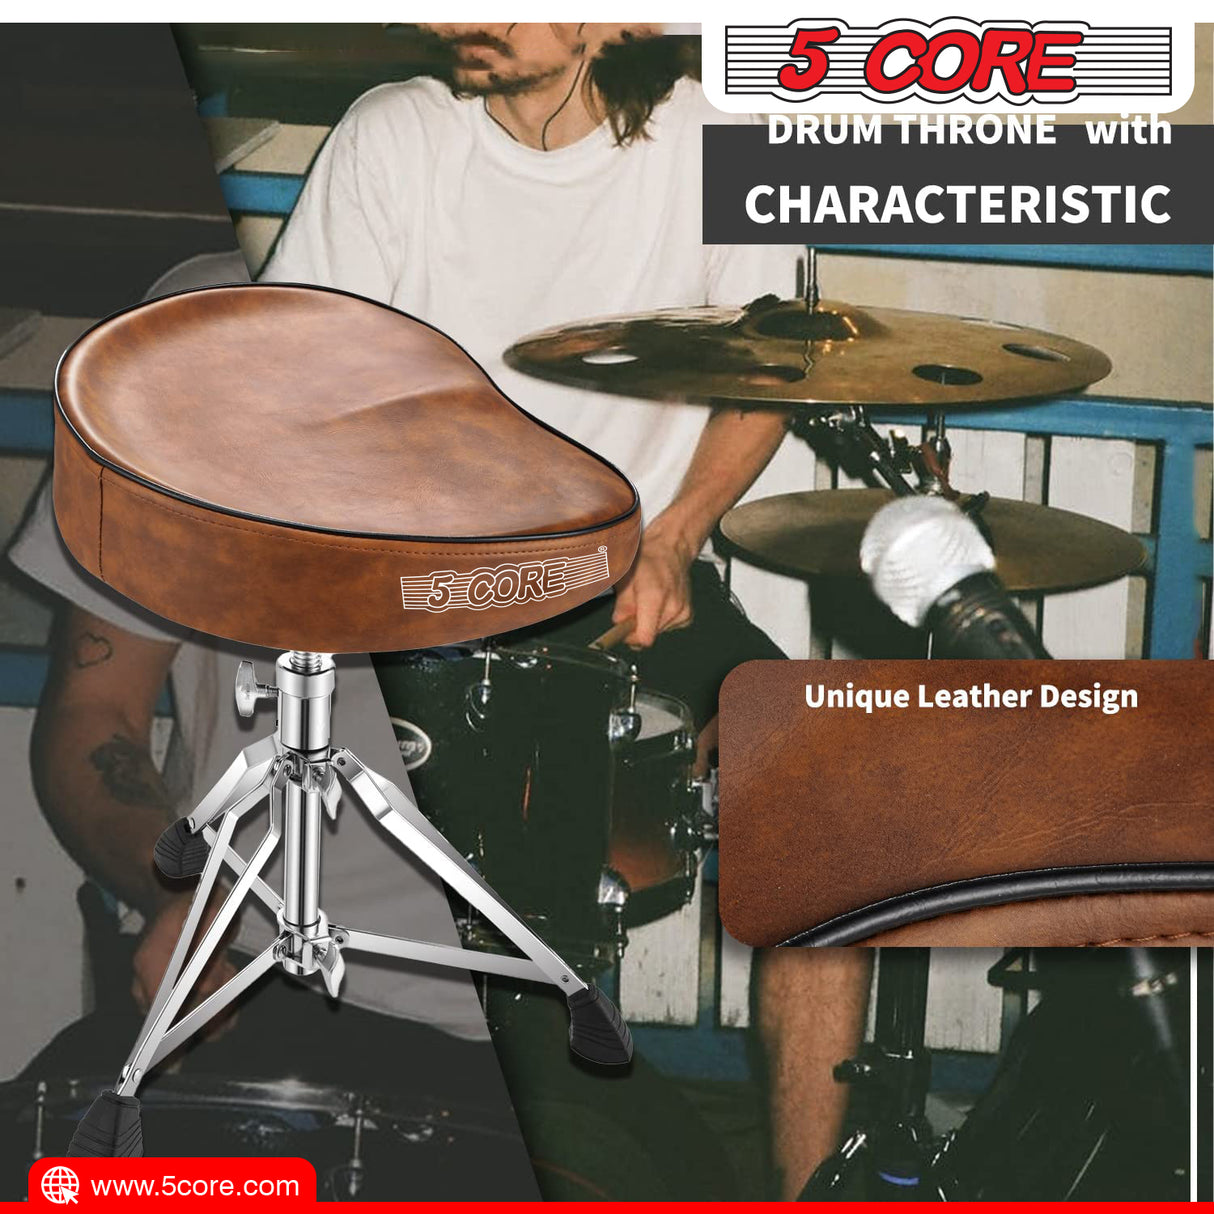 5 Core Drum Throne Saddle Brown| Height Adjustable Padded Comfortable Drum Seat| Stools Chair Style with Double Braced Anti-Slip Feet, Comfortable Seat for Drummers, Guitar Players- DS CH BR SDL